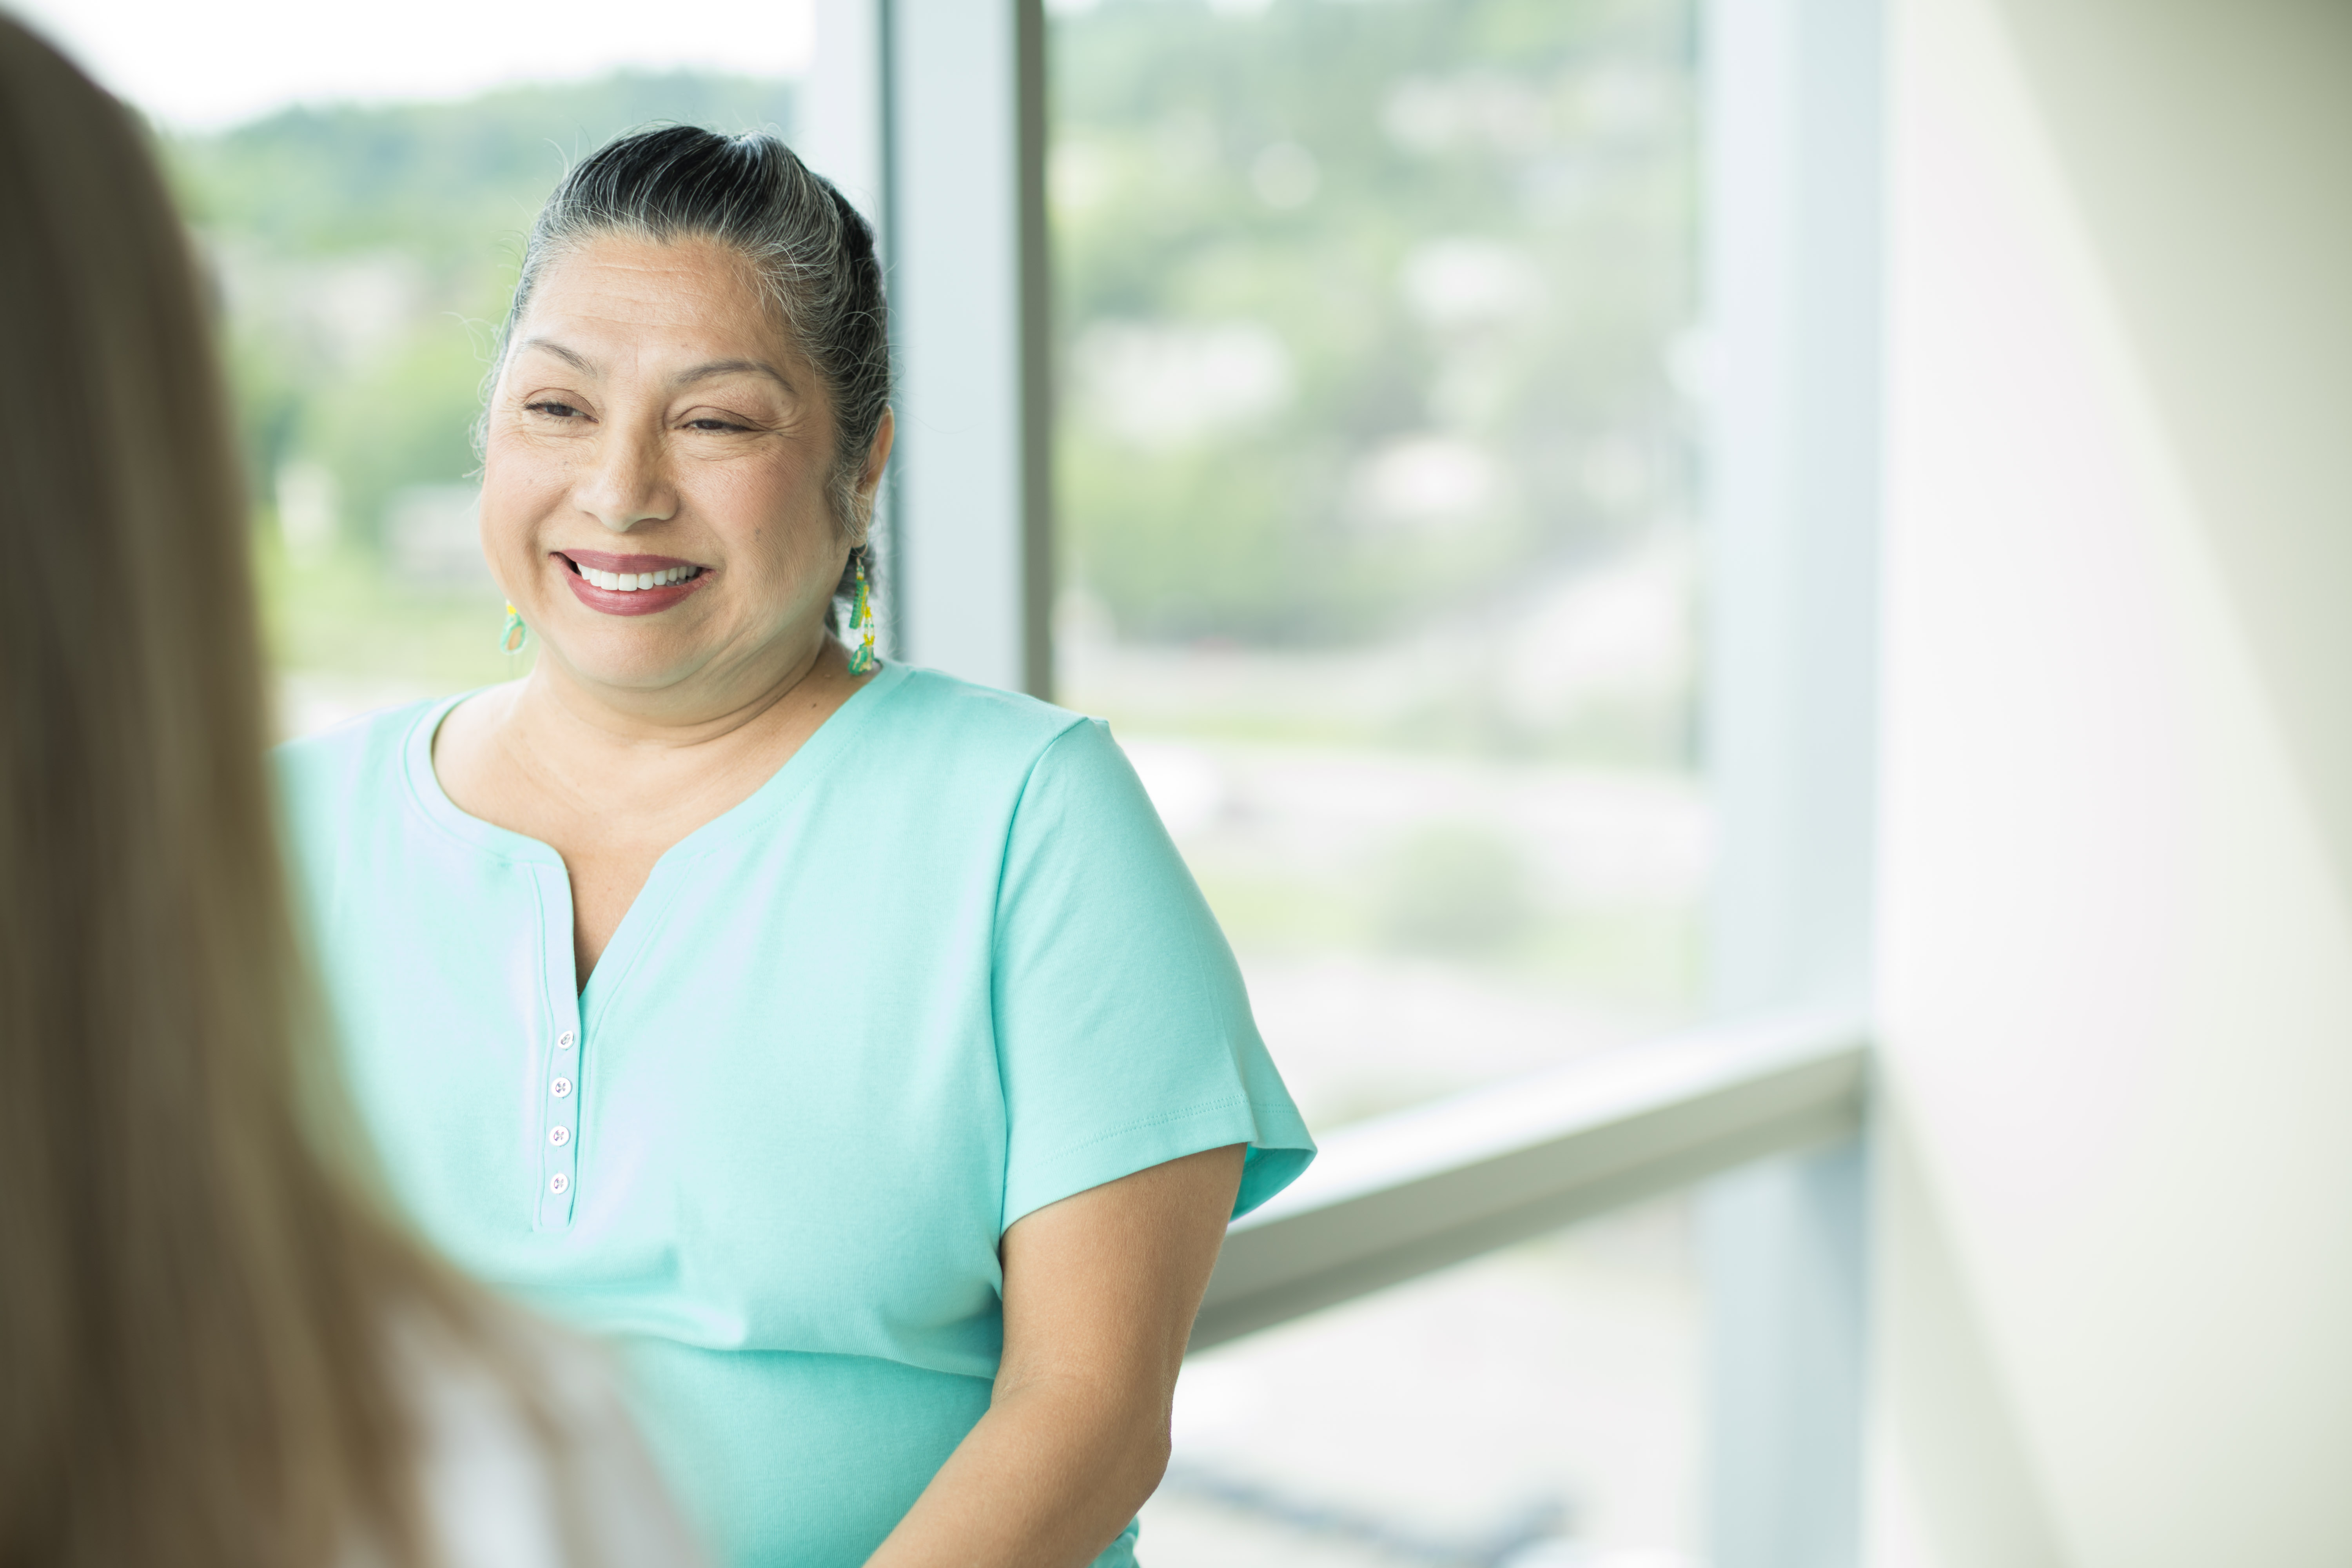 Photograph of a smiling woman in a clinic room with a window. At the OHSU Parkinson Center, patients receive care from a team of experts.